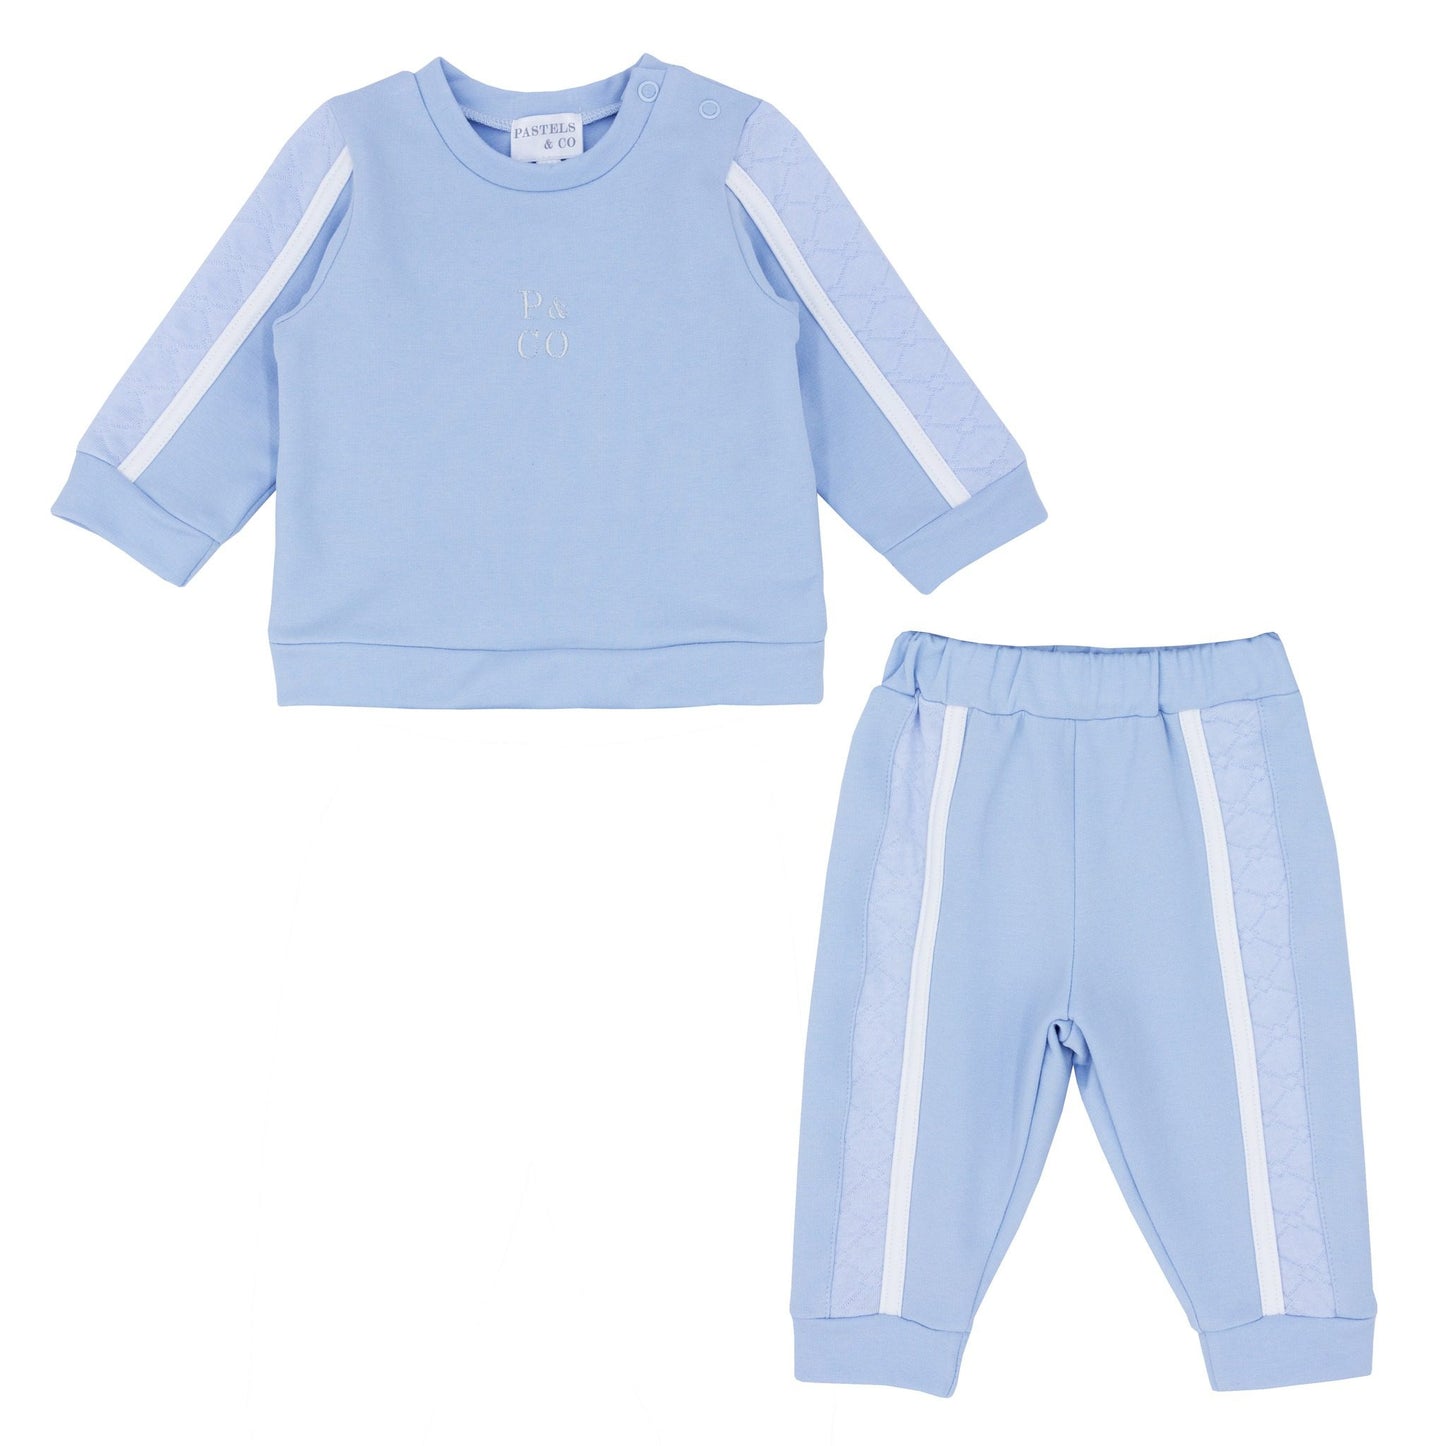 Pastels & Co Boys Tracksuit Art AW